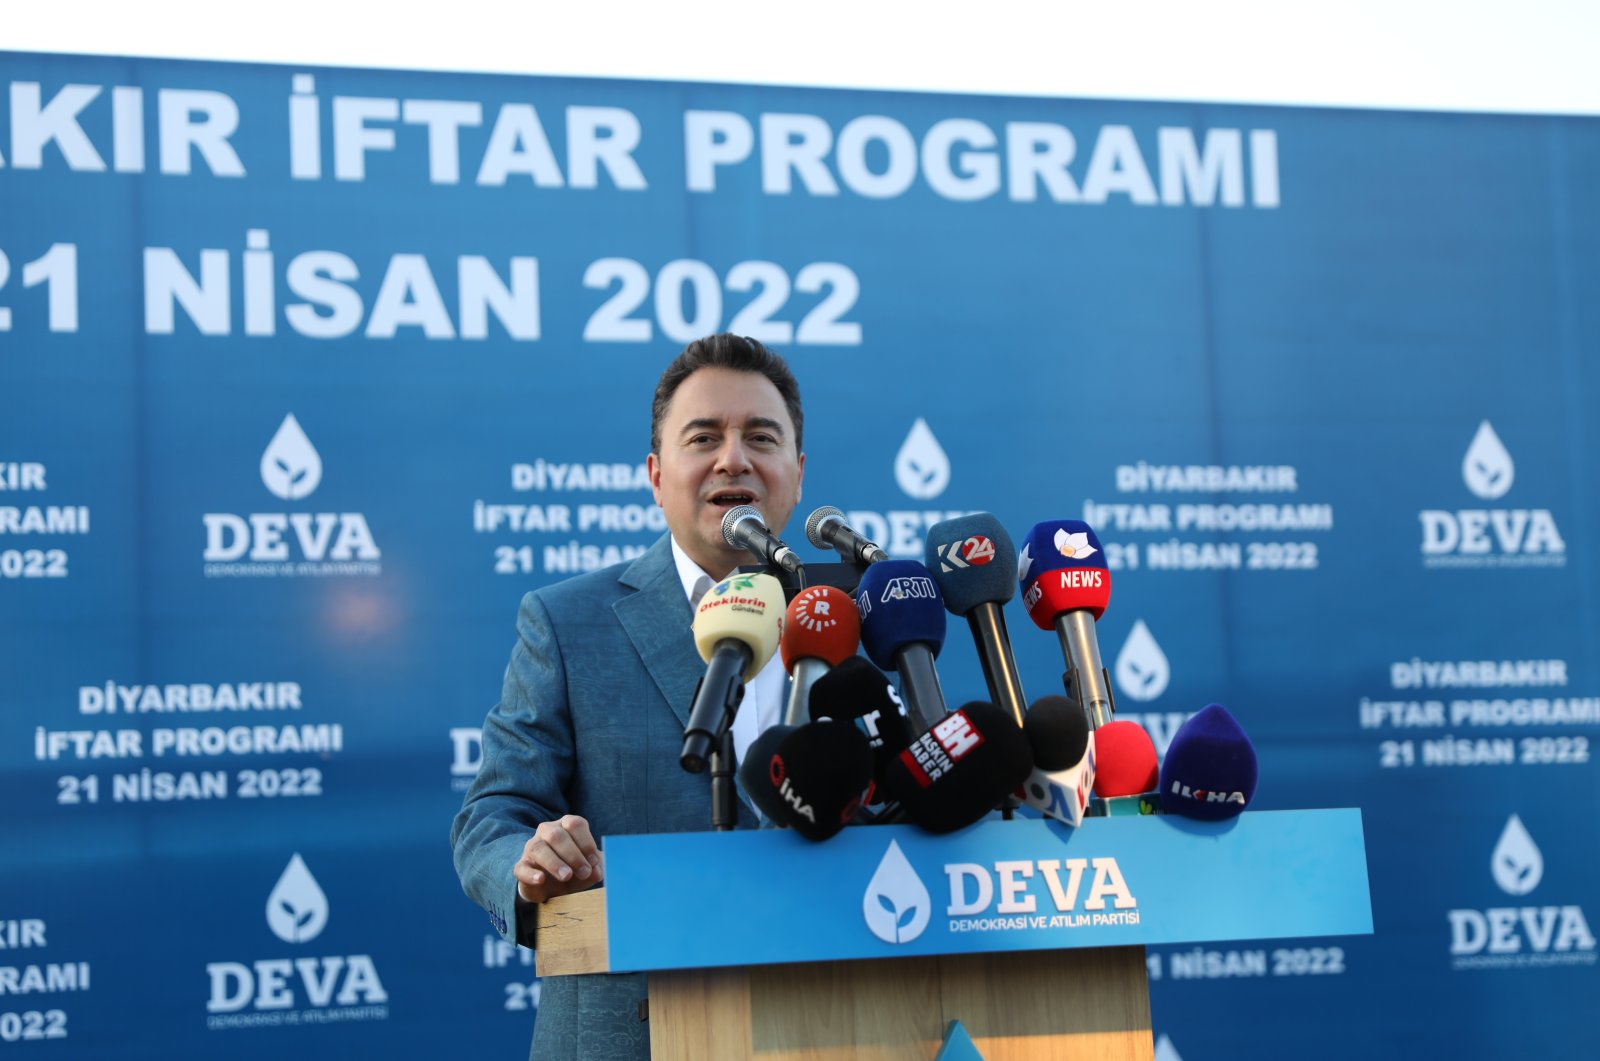 DEVA Chairperson Ali Babacan speaks at an iftar dinner organized by his party in Diyarbakır, Turkey, April 22, 2022. (AA Photo)